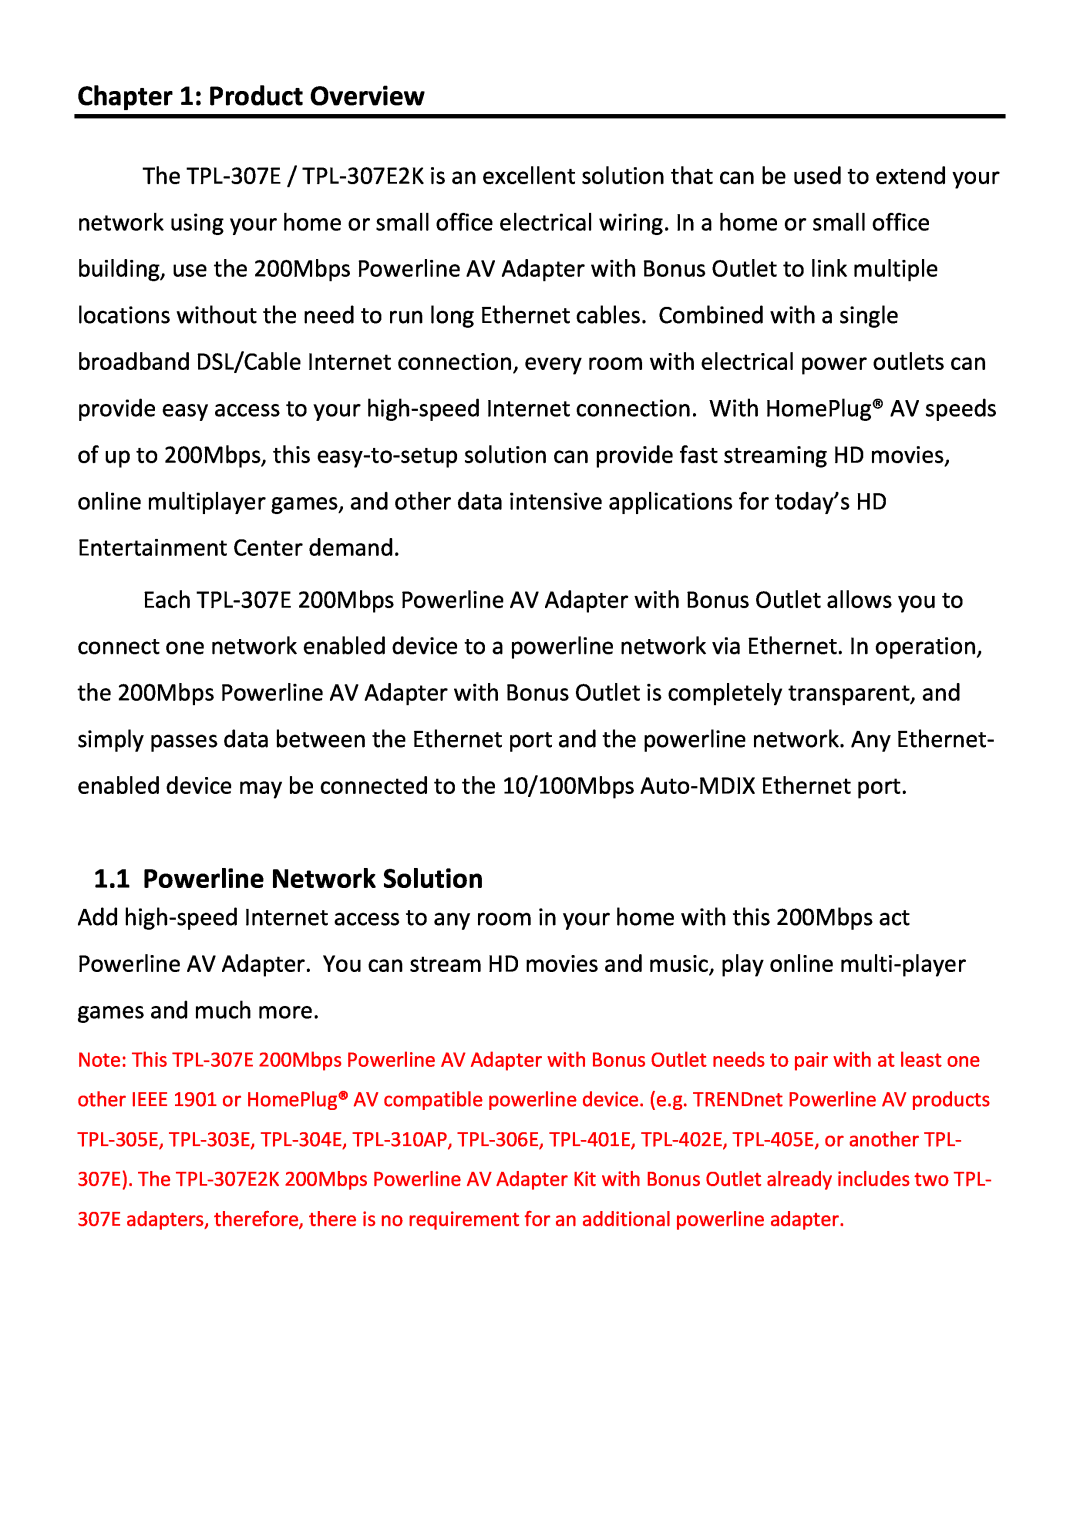 TRENDnet TPL307E2K manual Product Overview, Powerline Network Solution 